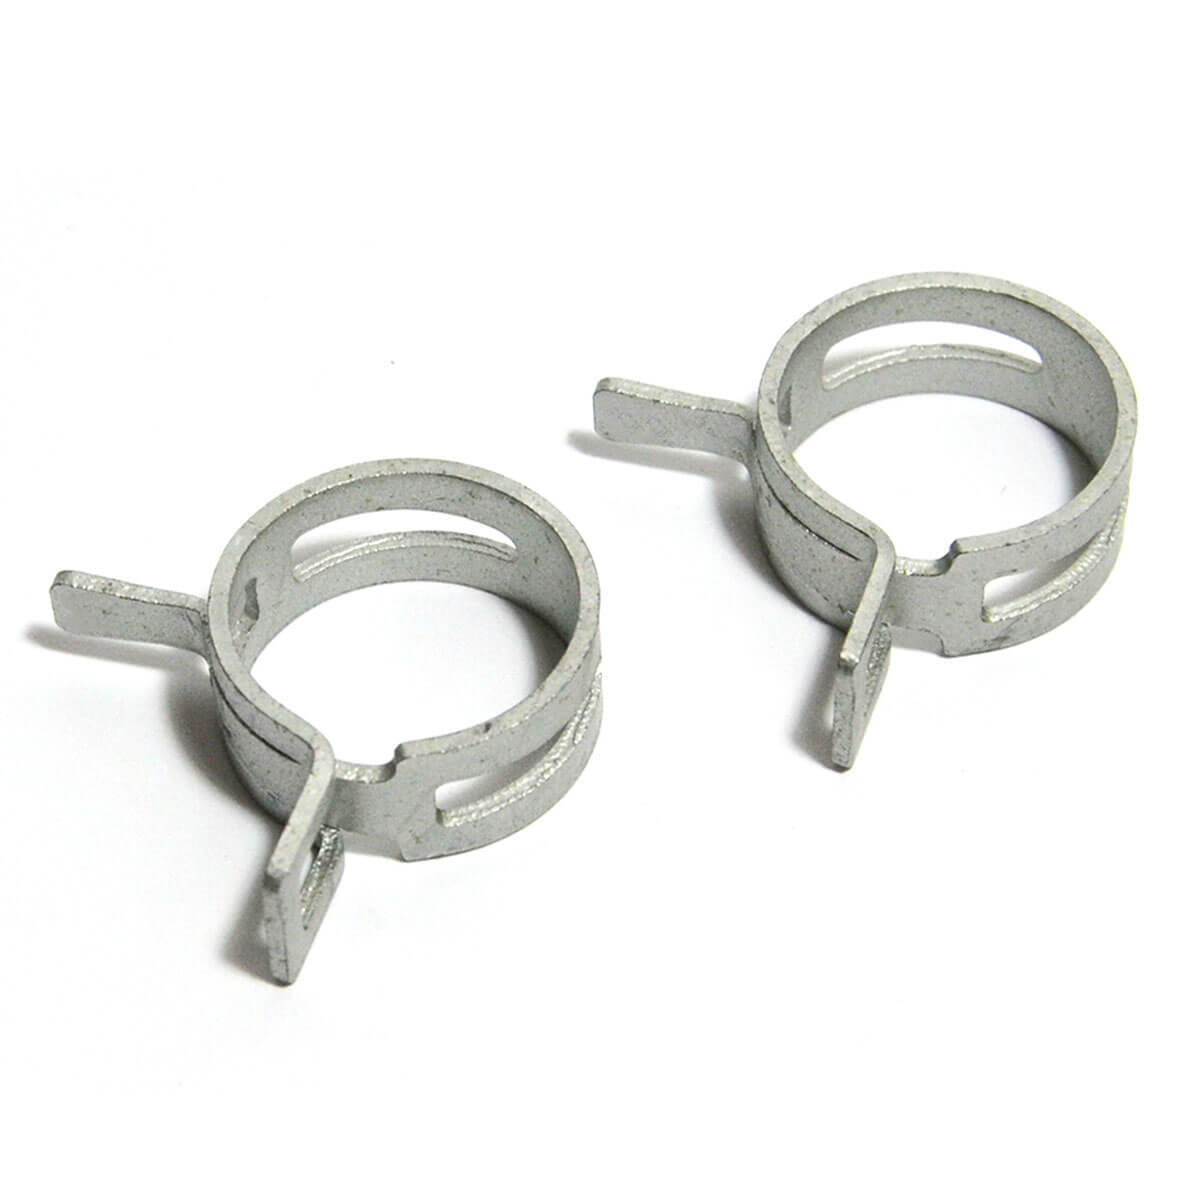 Hose Clamps Spring Size 19 these suit 19mm (3/4") hose Pack of 2